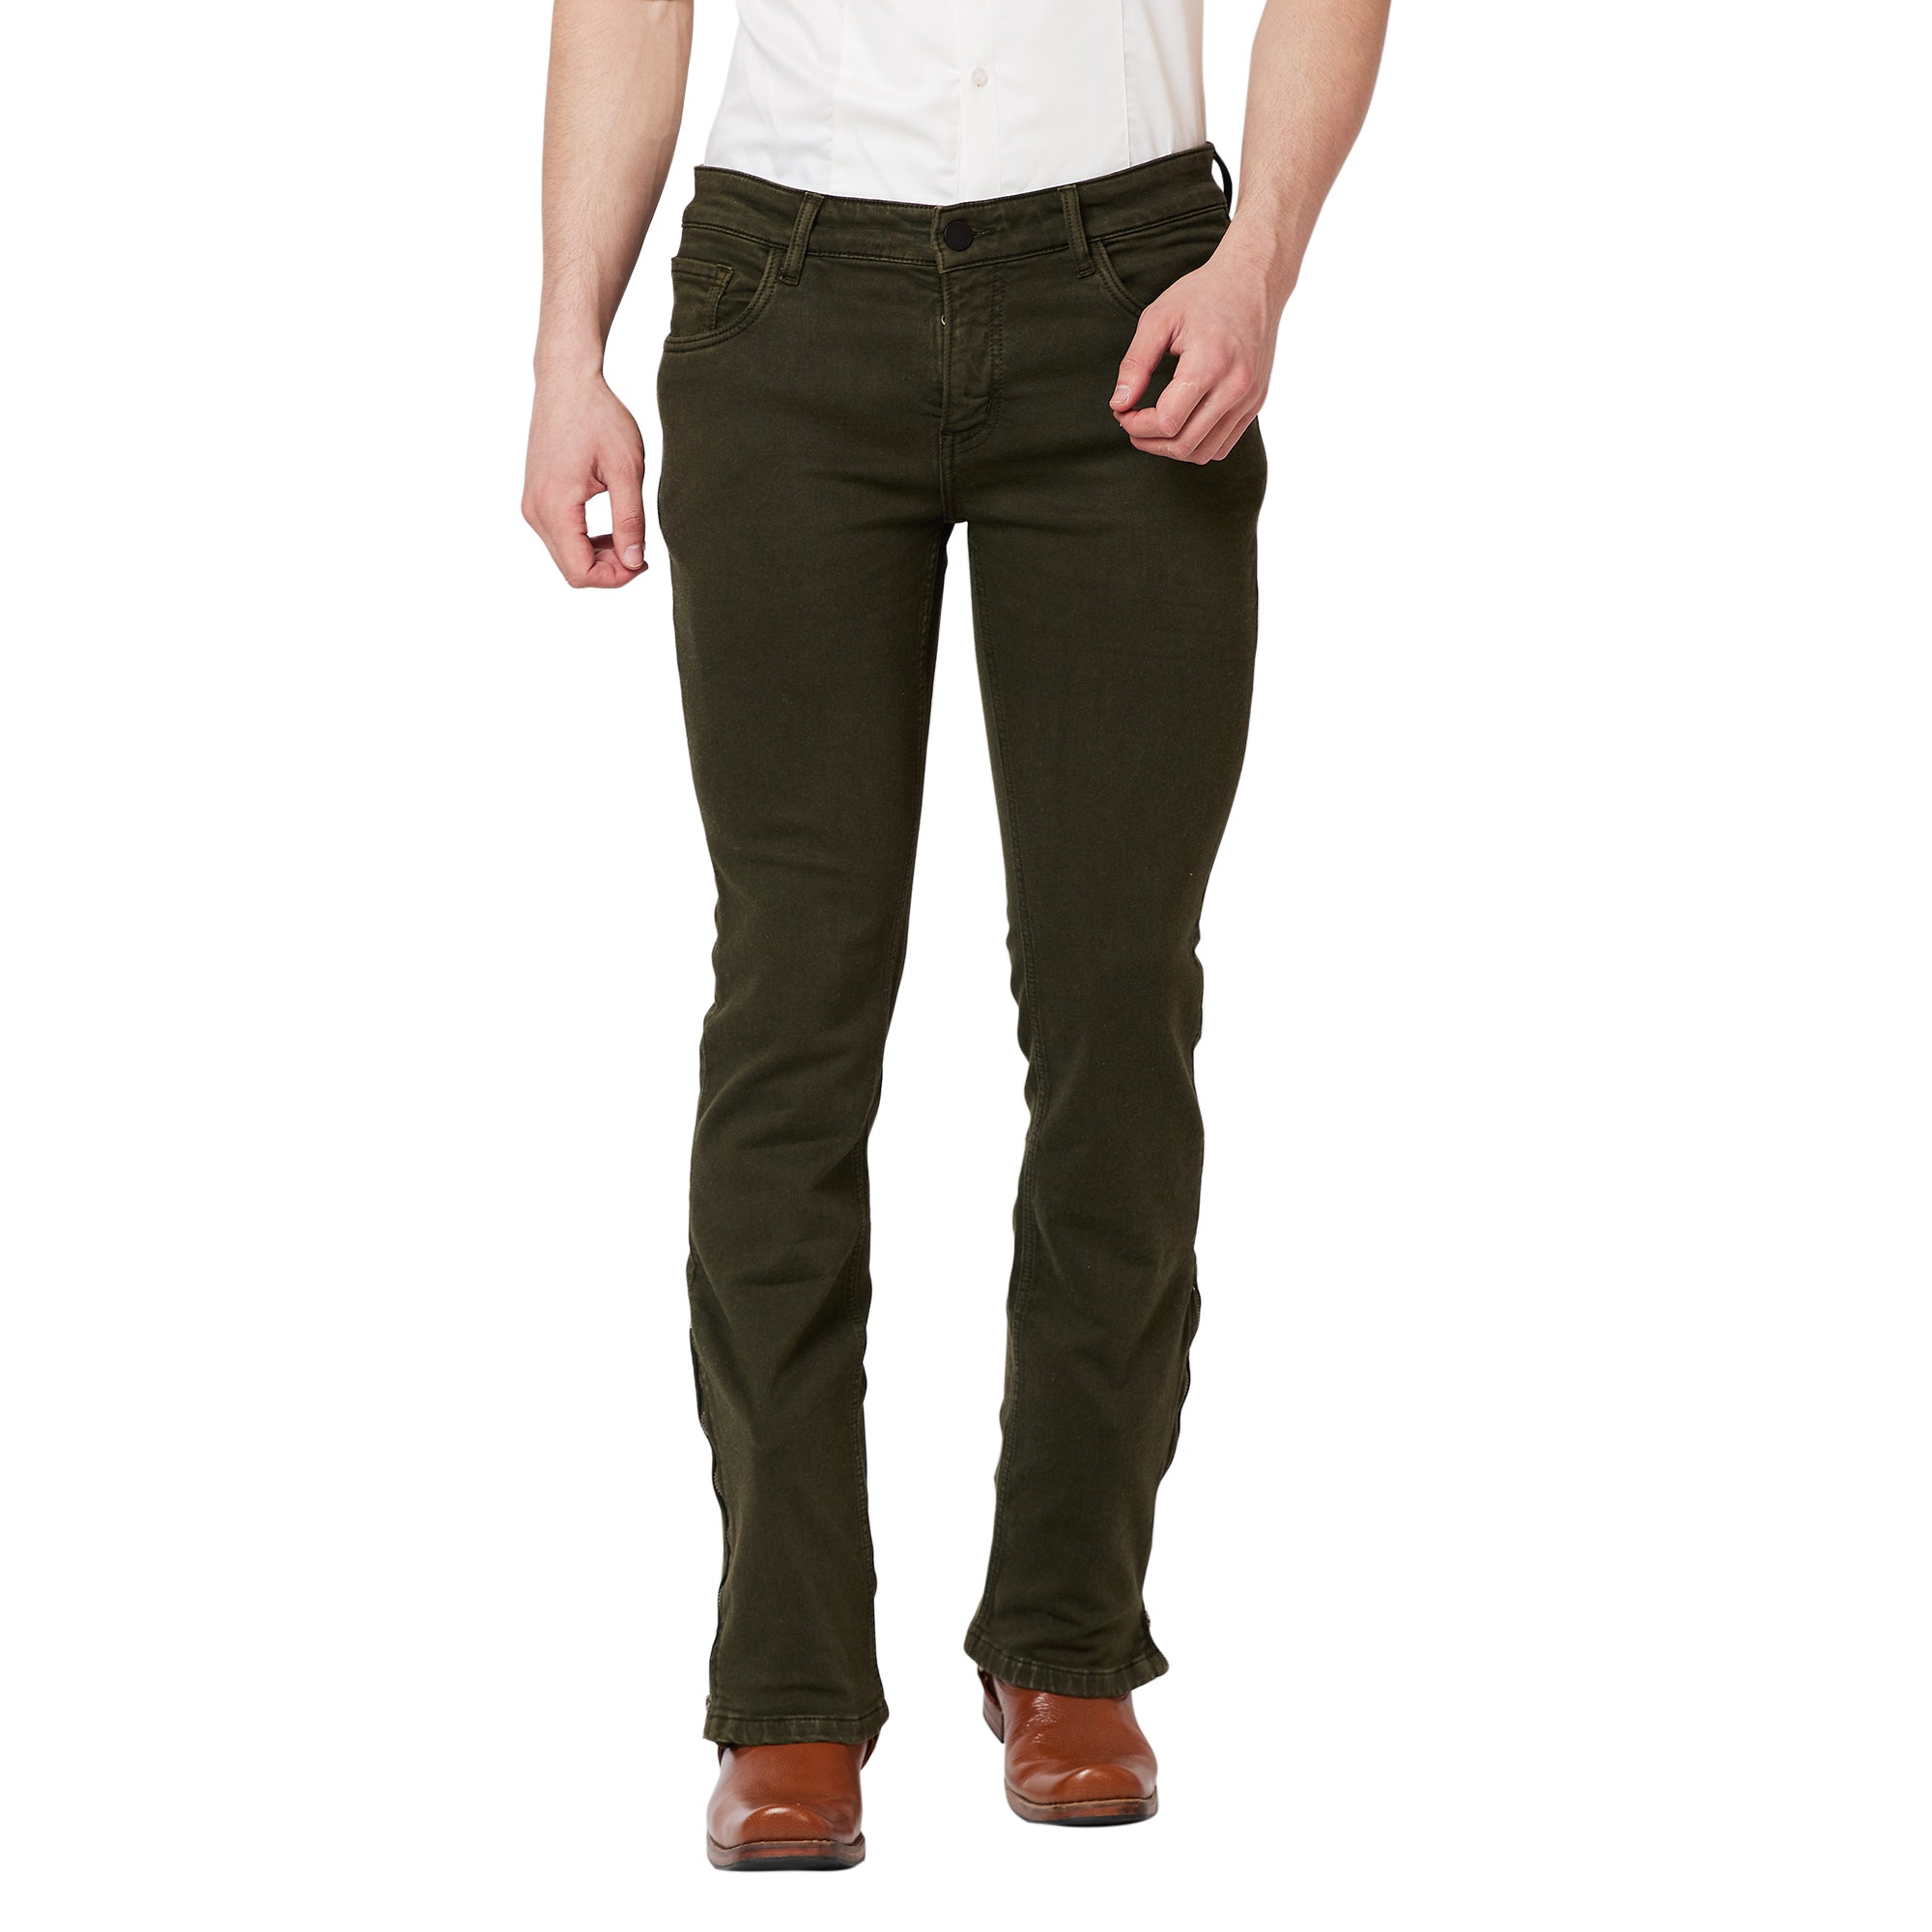 Olive Green Boot-cut Jeans With Zipper Bottom For Mens